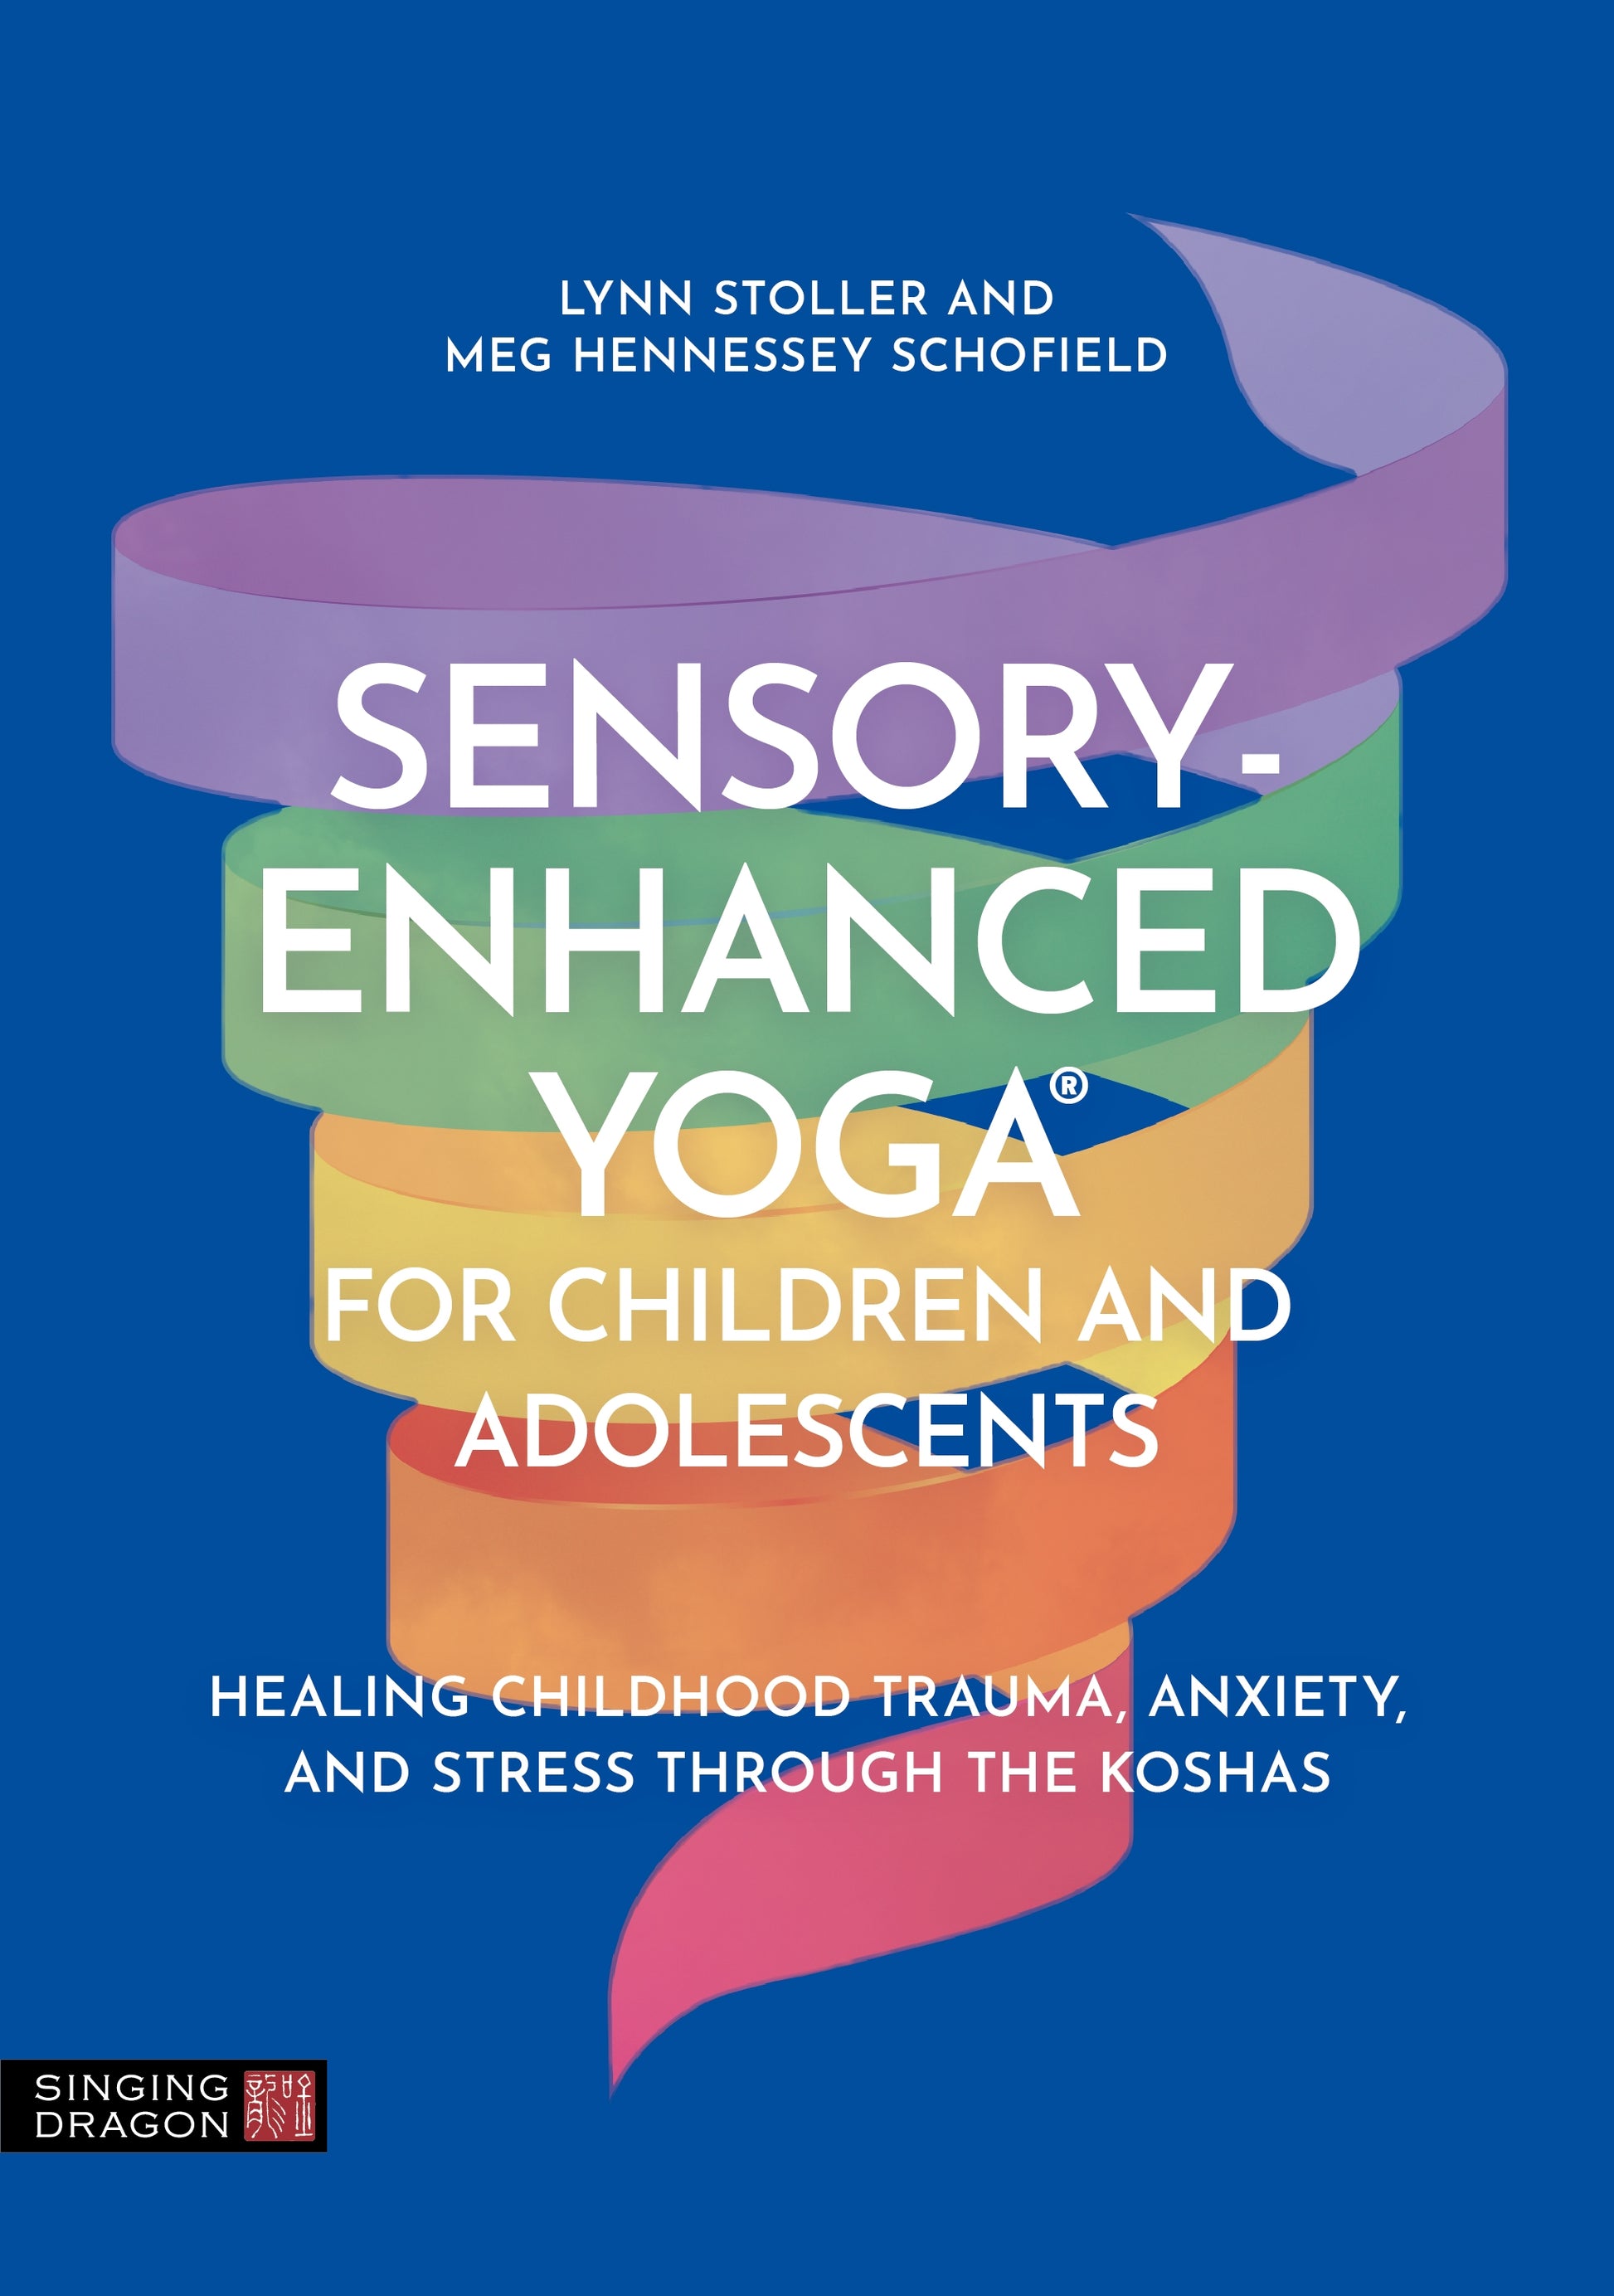 Sensory-Enhanced Yoga® for Children and Adolescents by Lynn Stoller, Meg Hennessey Schofield